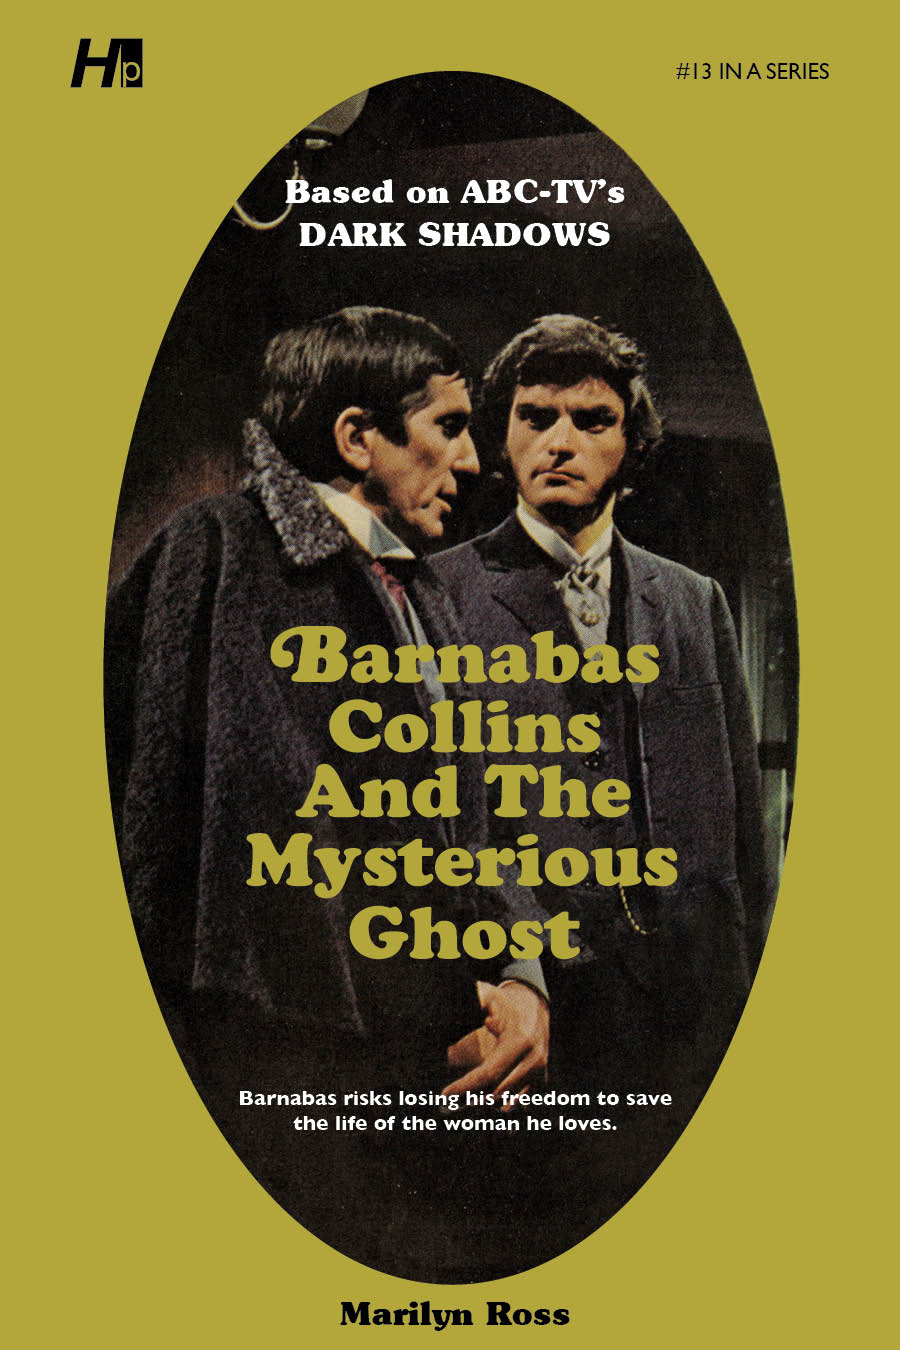 Dark Shadows #13: Barnabas Collins and the Mysterious Ghost [Paperback]